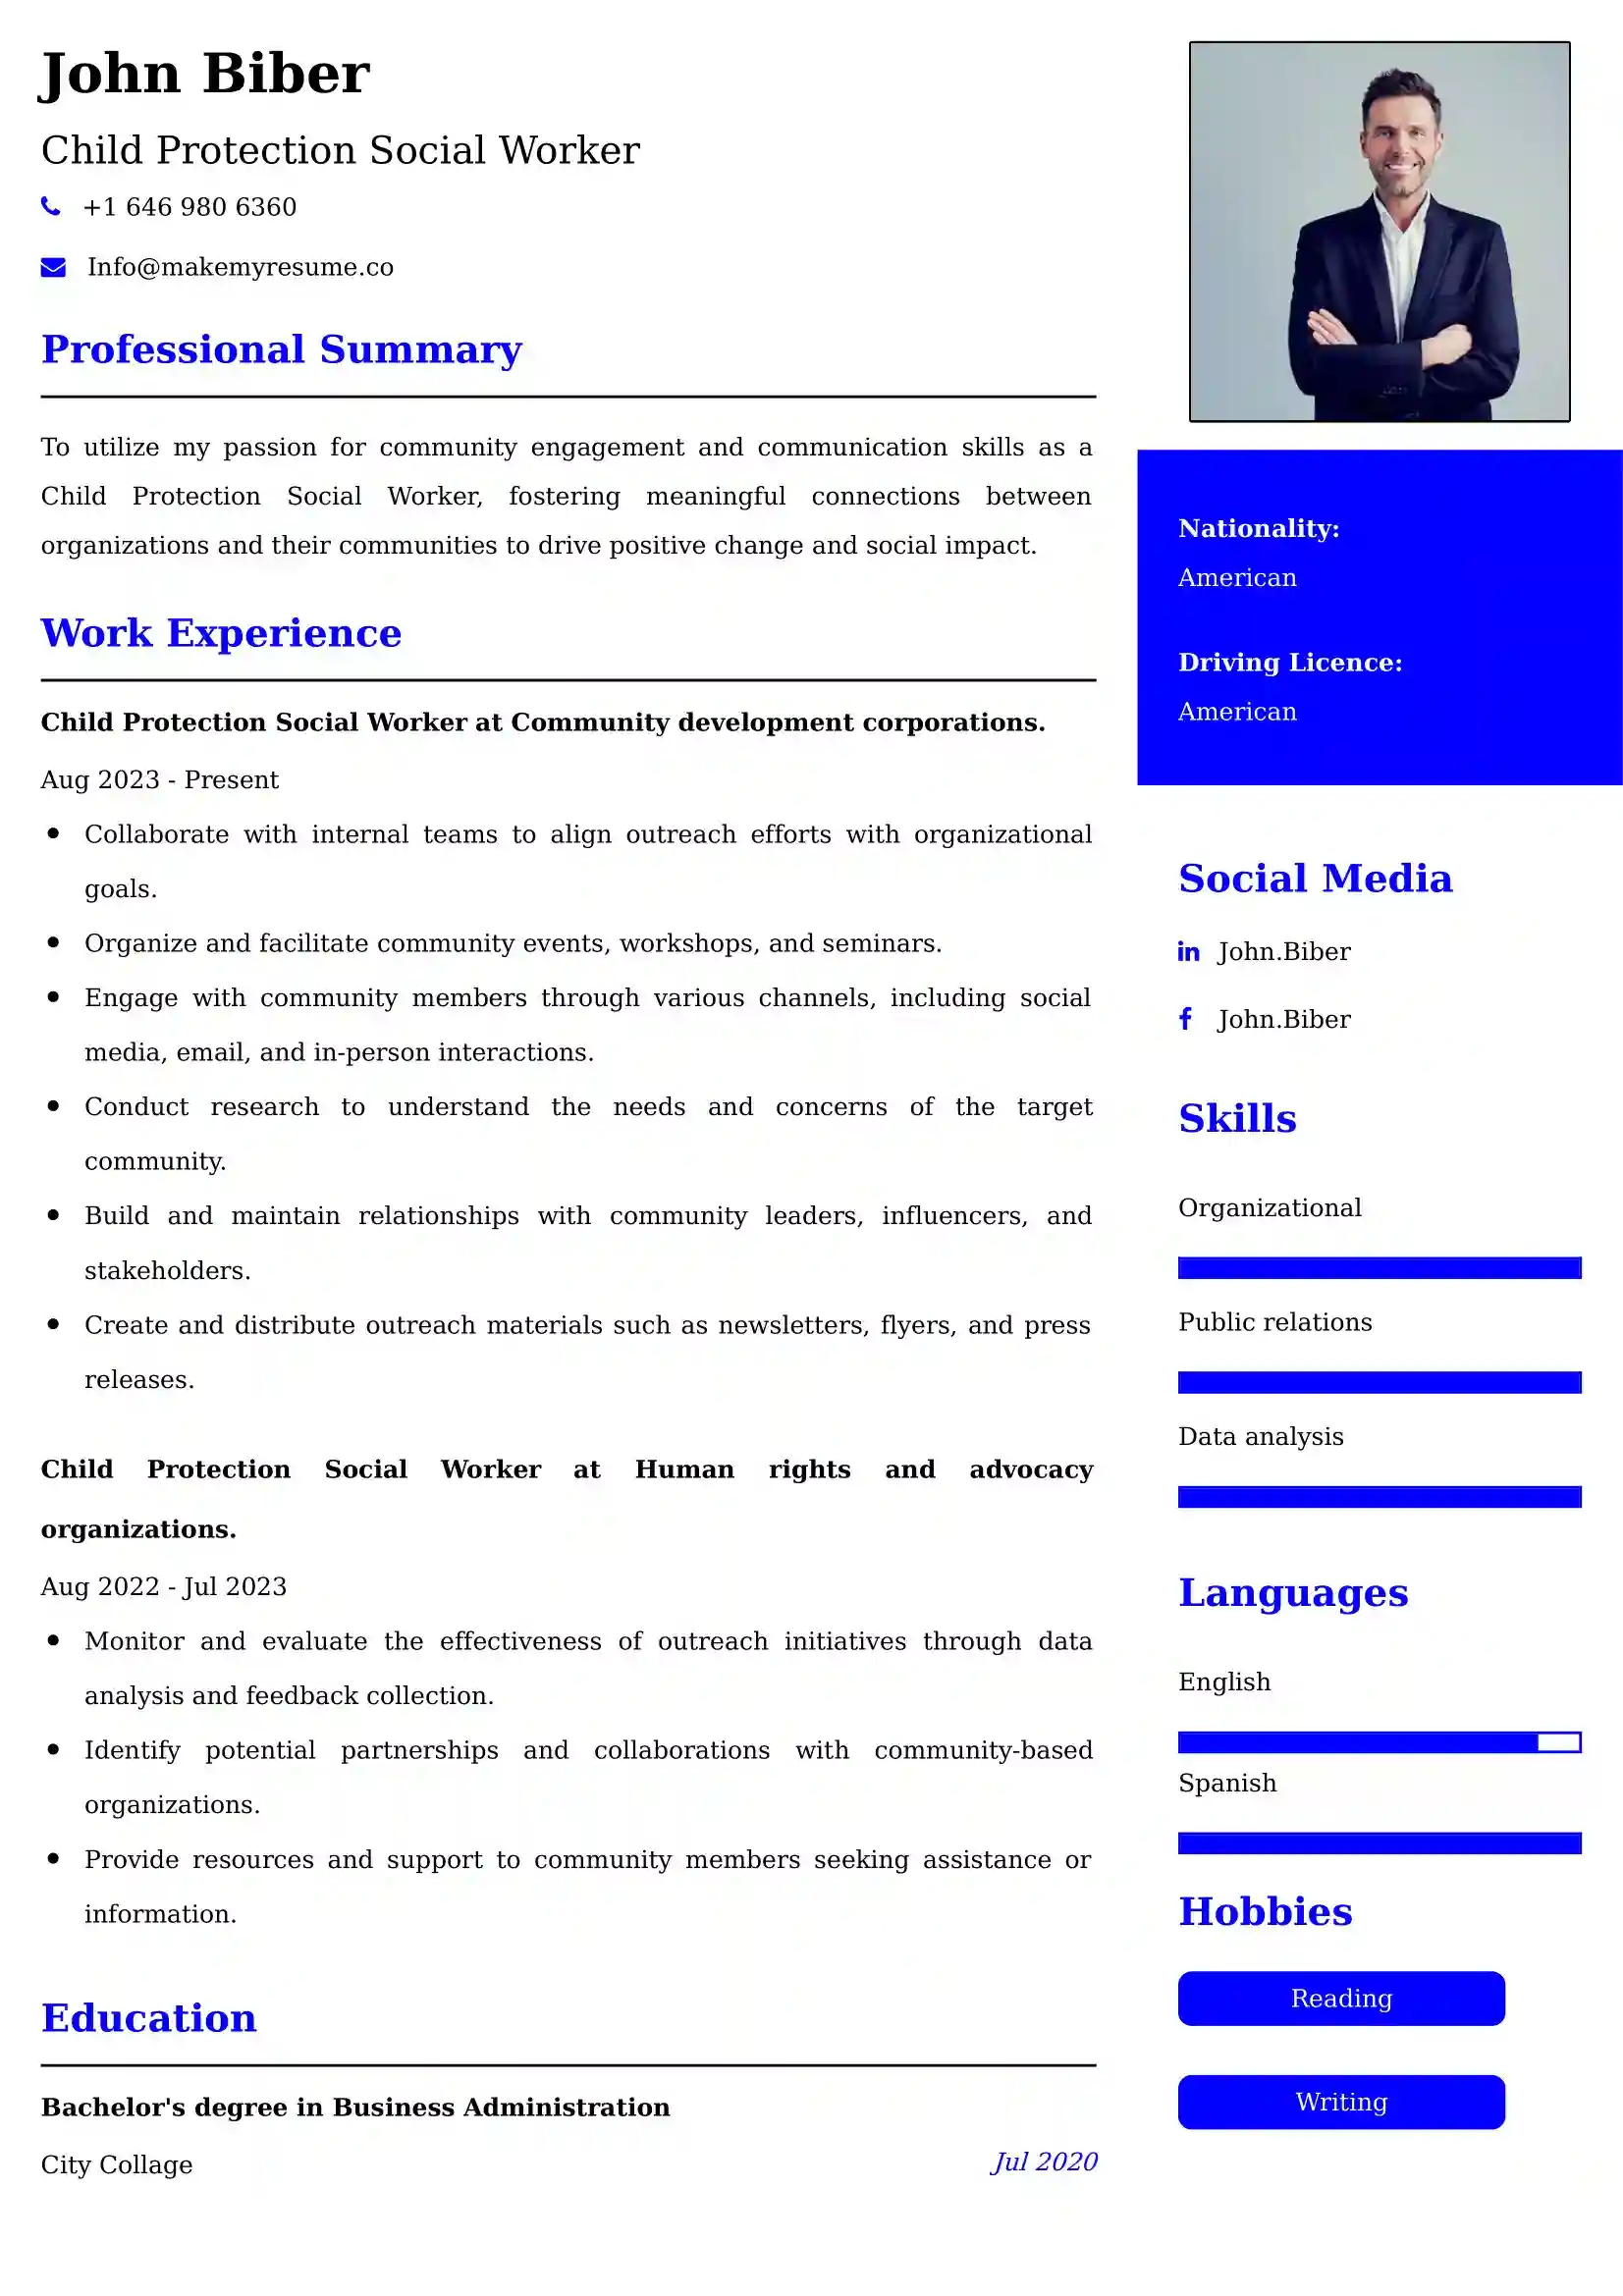 Child Protection Social Worker Resume Examples - UK Format, Latest Template.